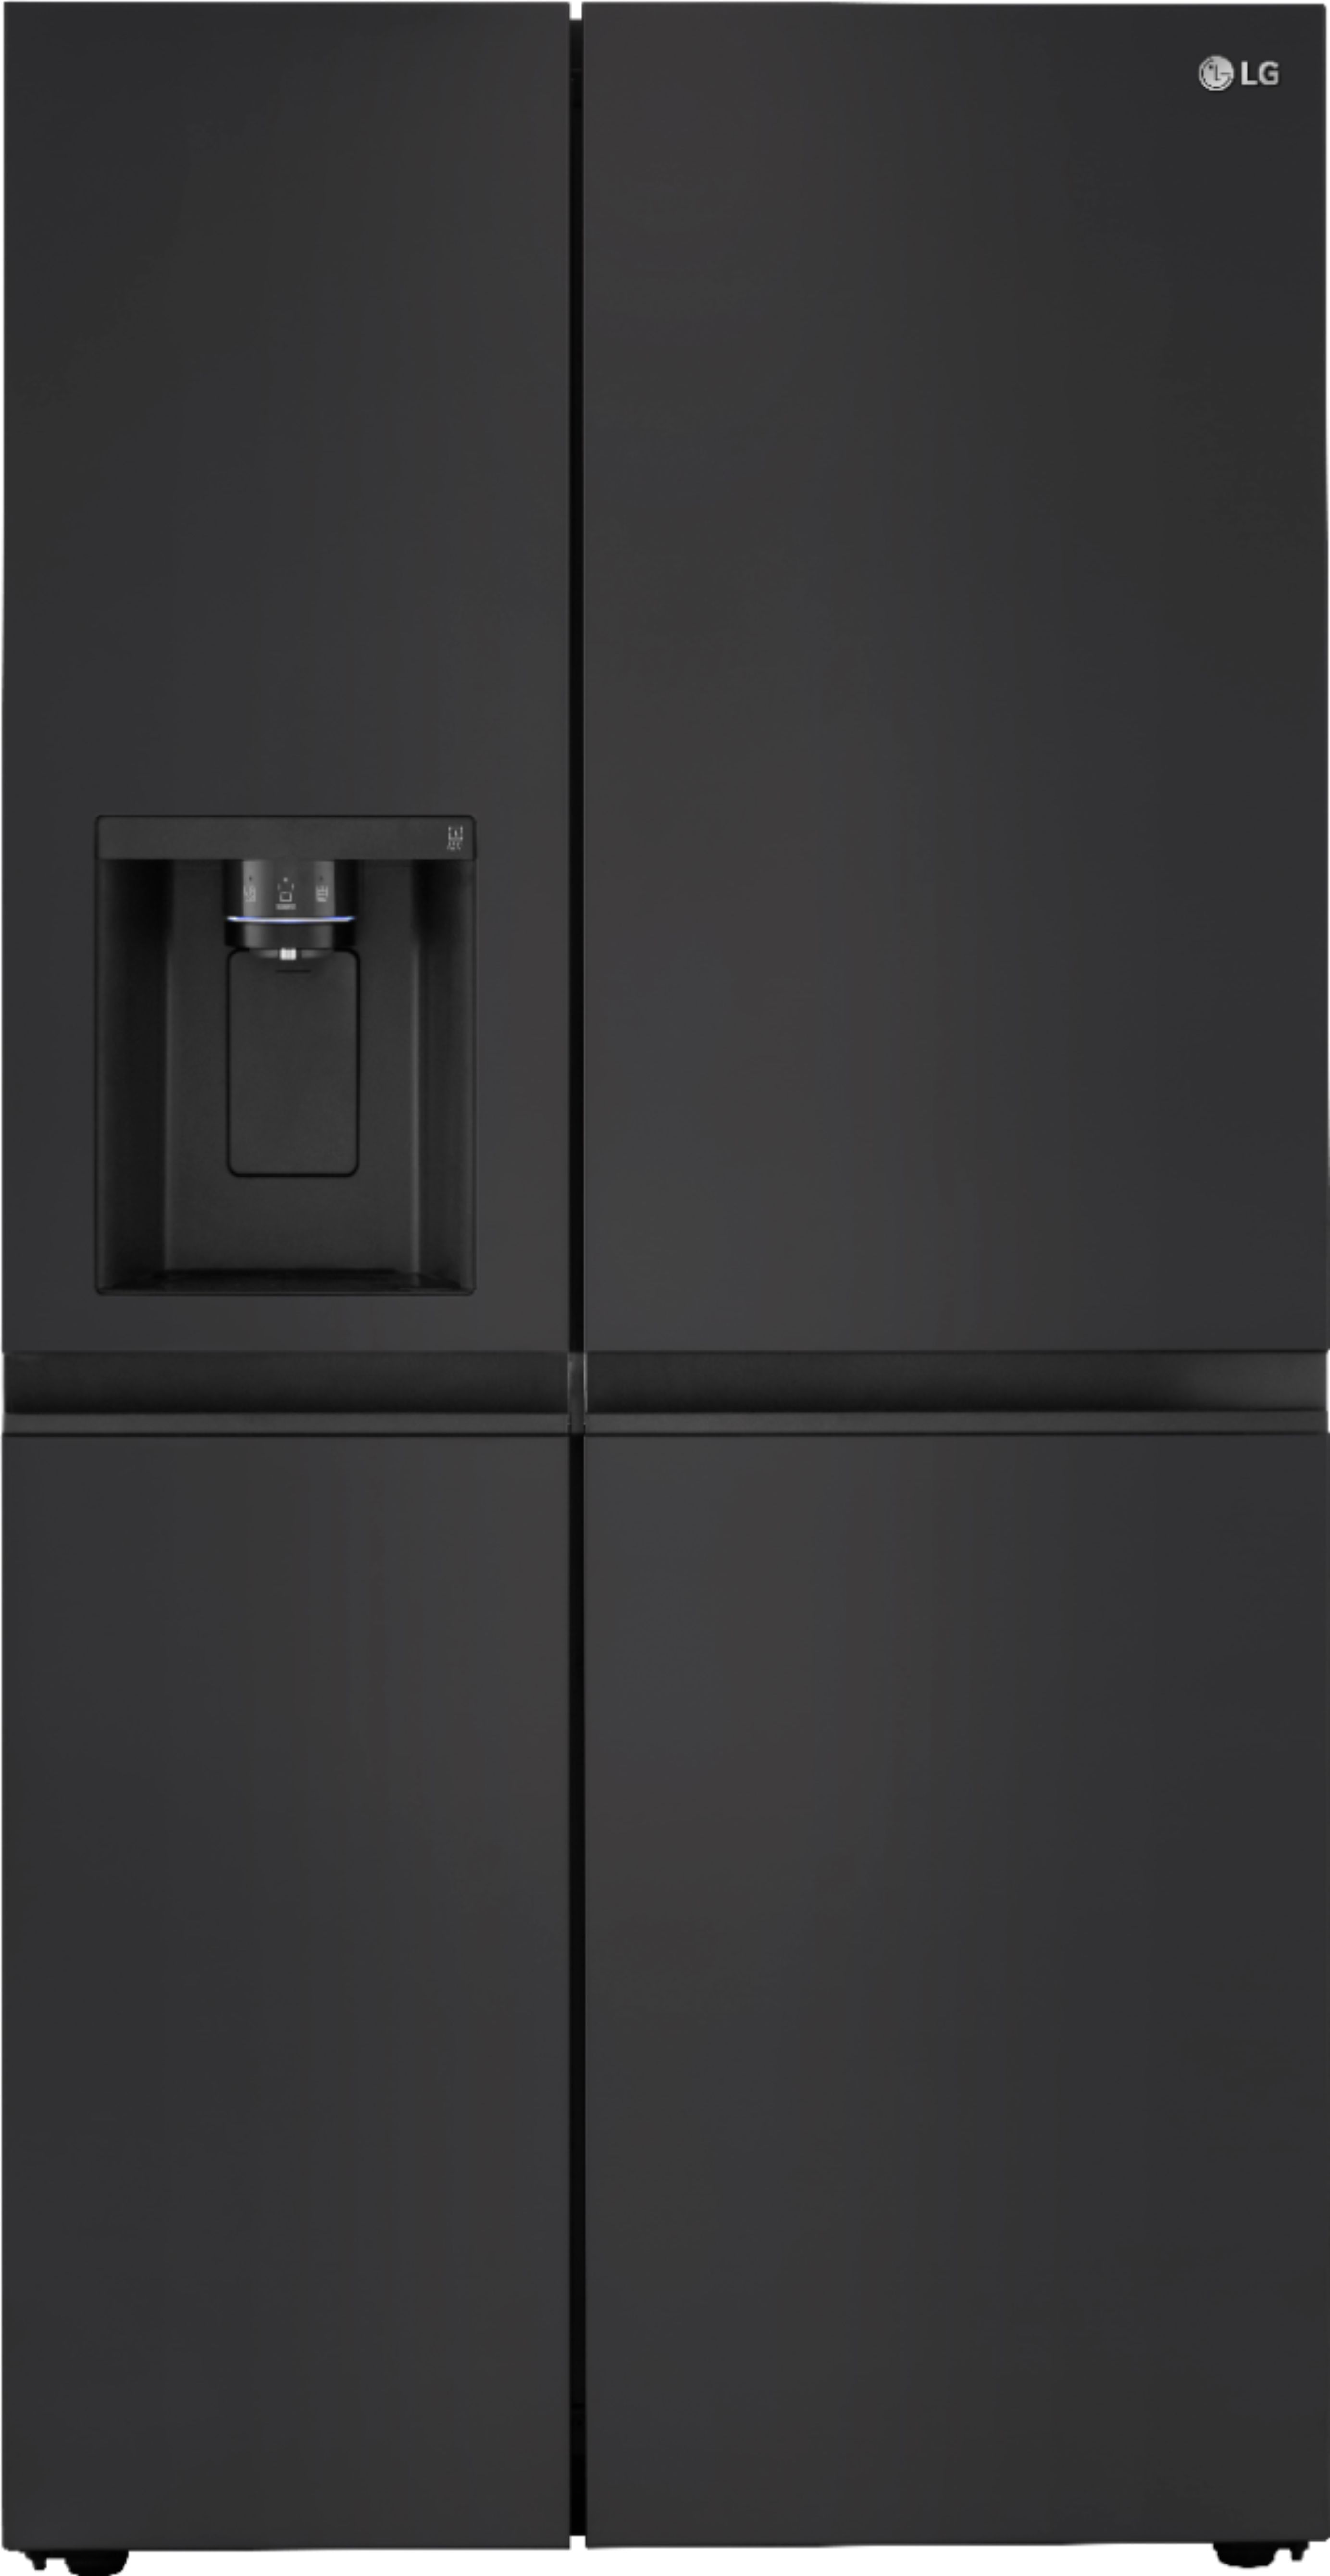 LG - 27.2 cu ft Side by Side Refrigerator with SpacePlus Ice - Smooth black